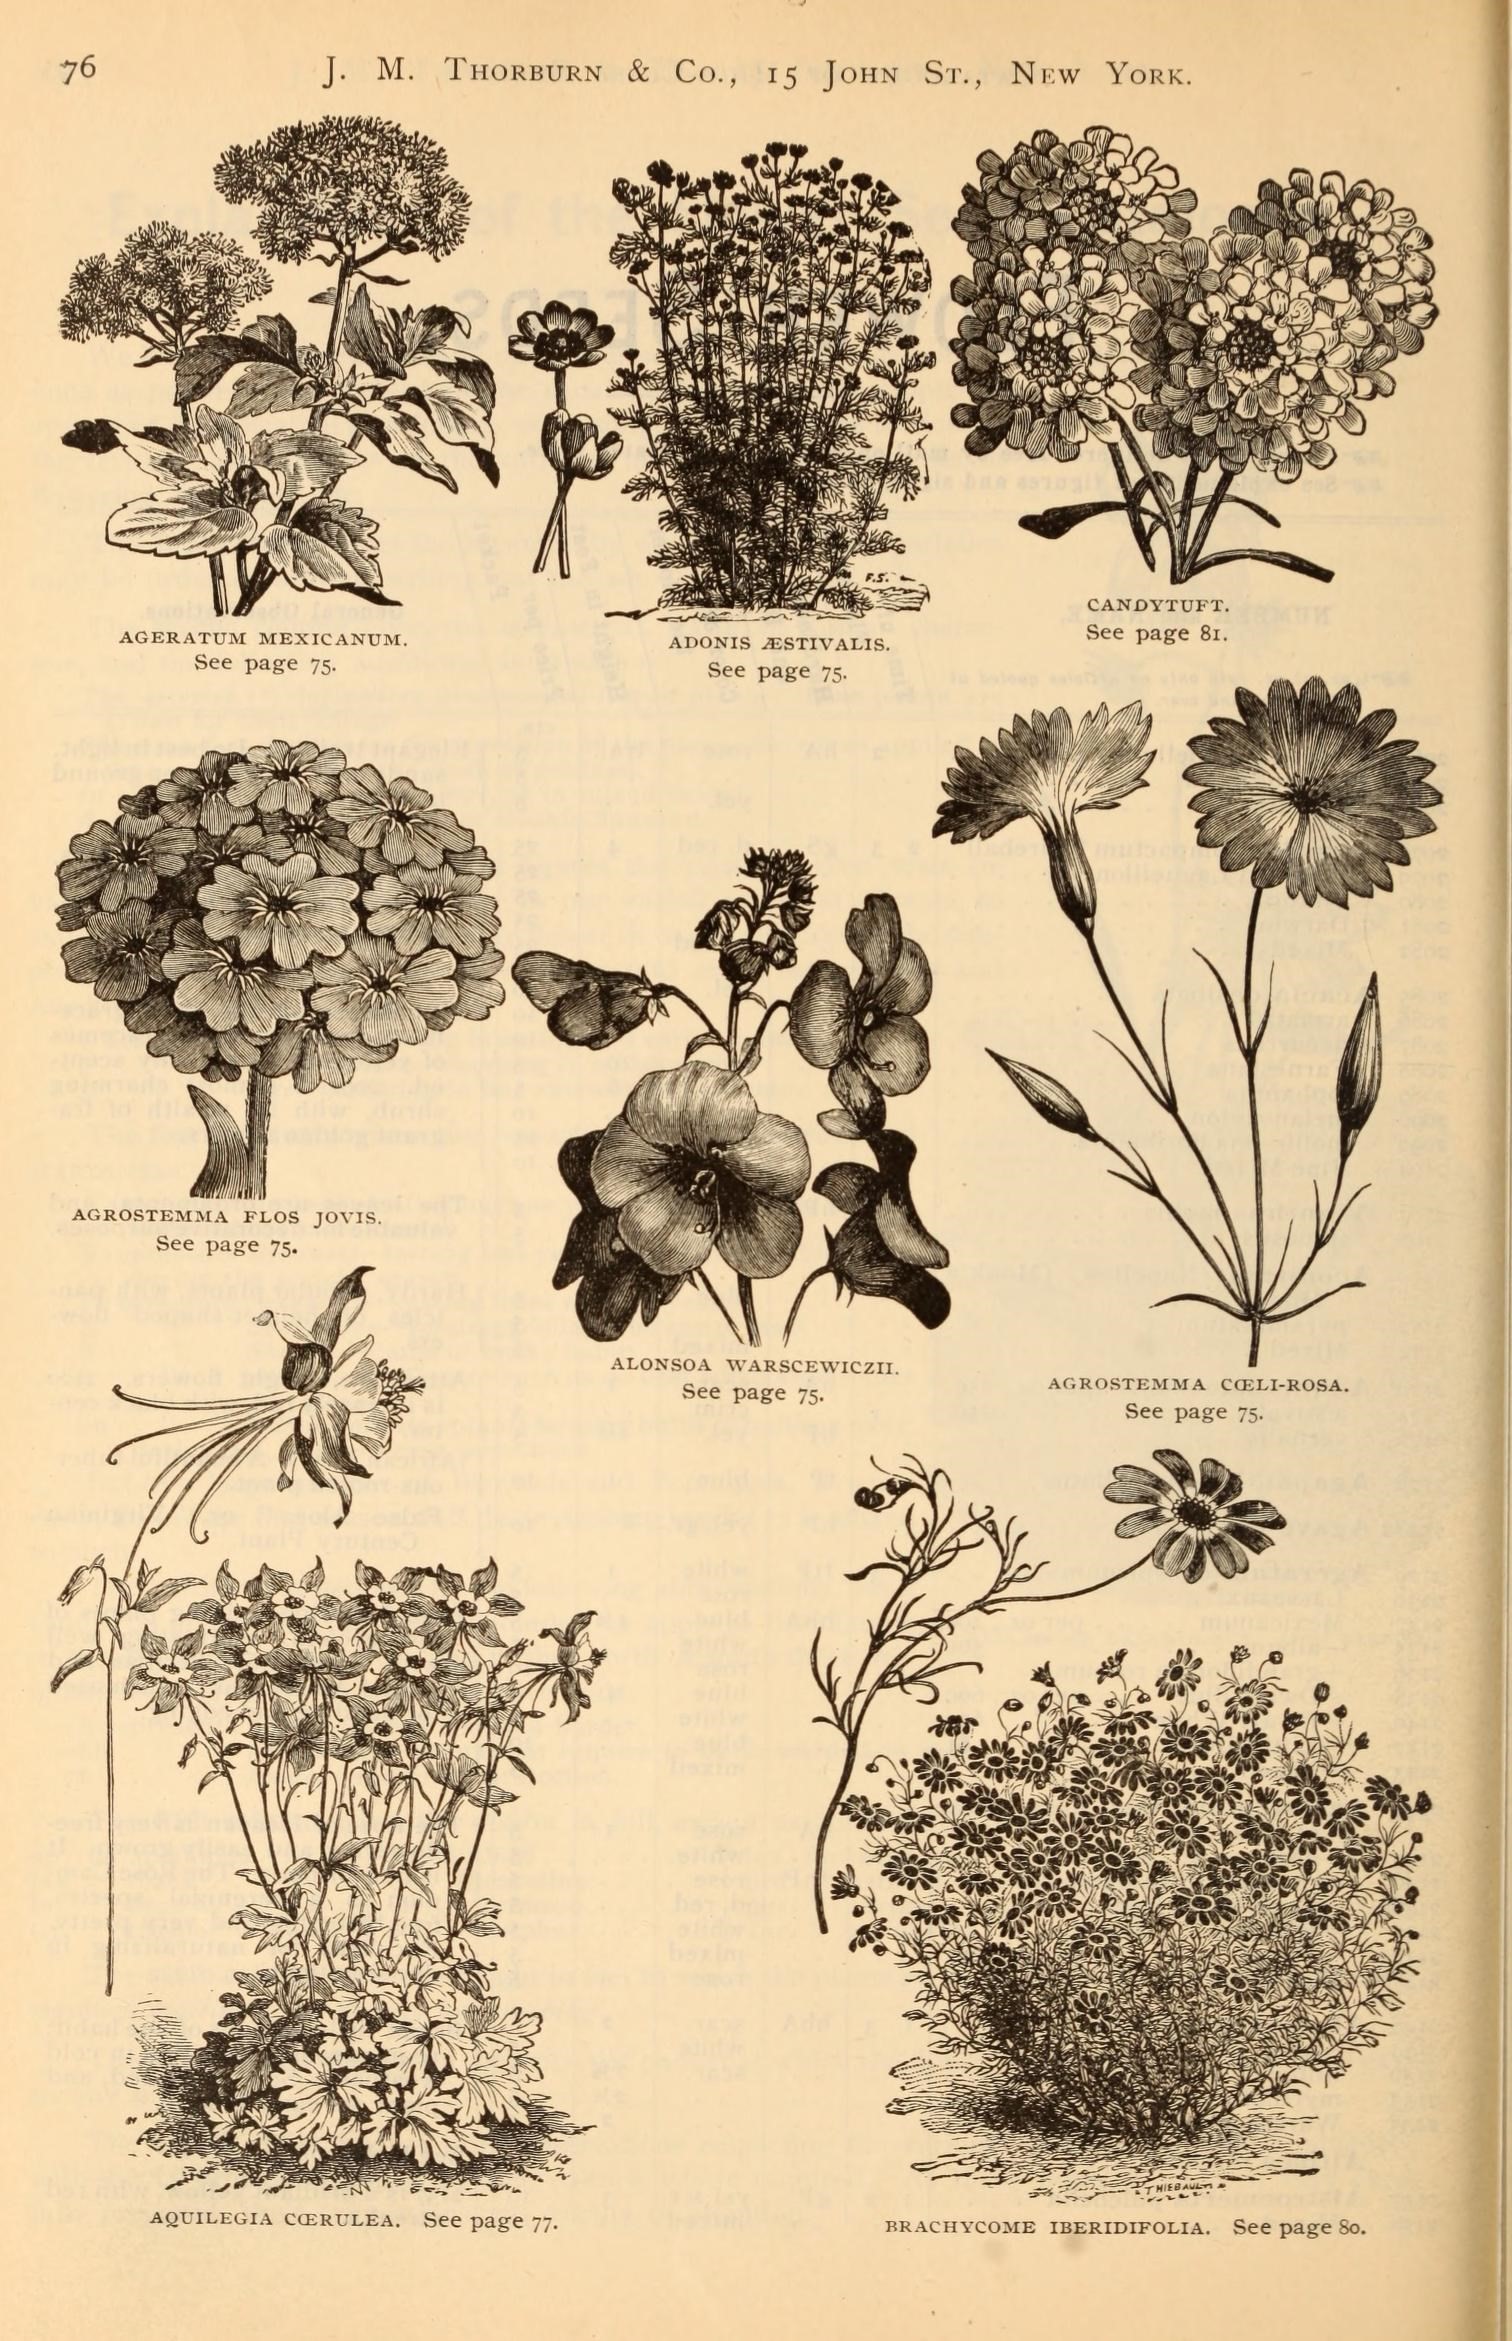 a page in a book shows the flowers and plants on display